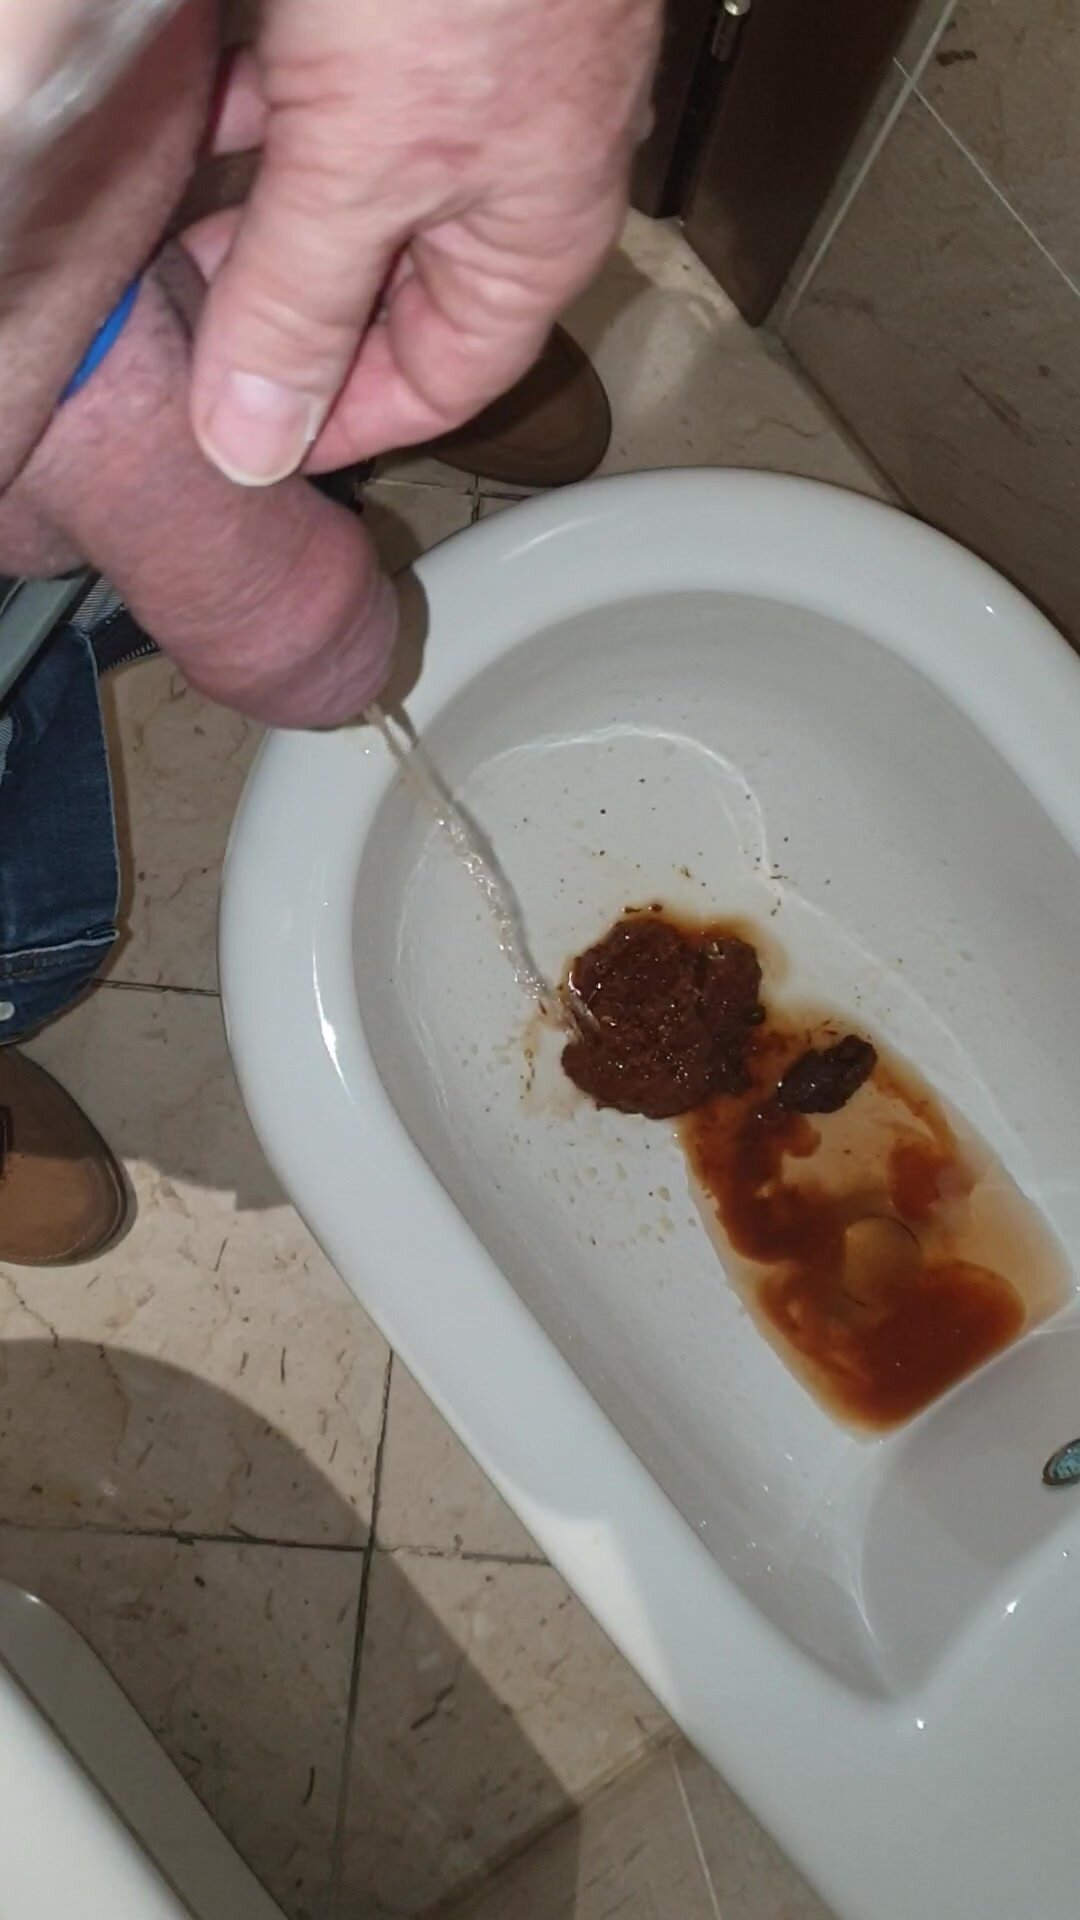 Scat in the bidet clogged